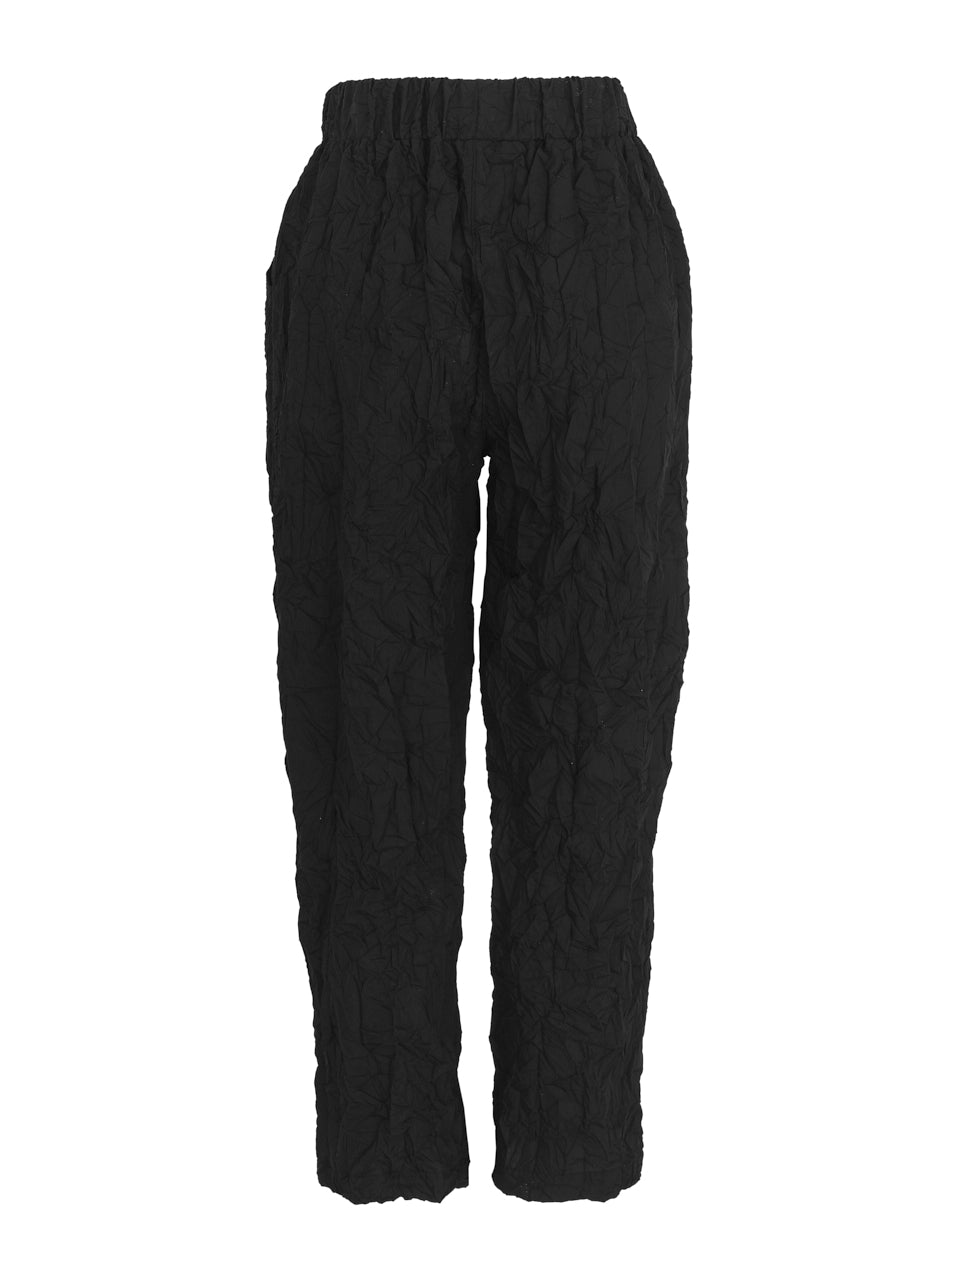 STONE ALLEY BLACK CROP PANT WITH ZIPPERS